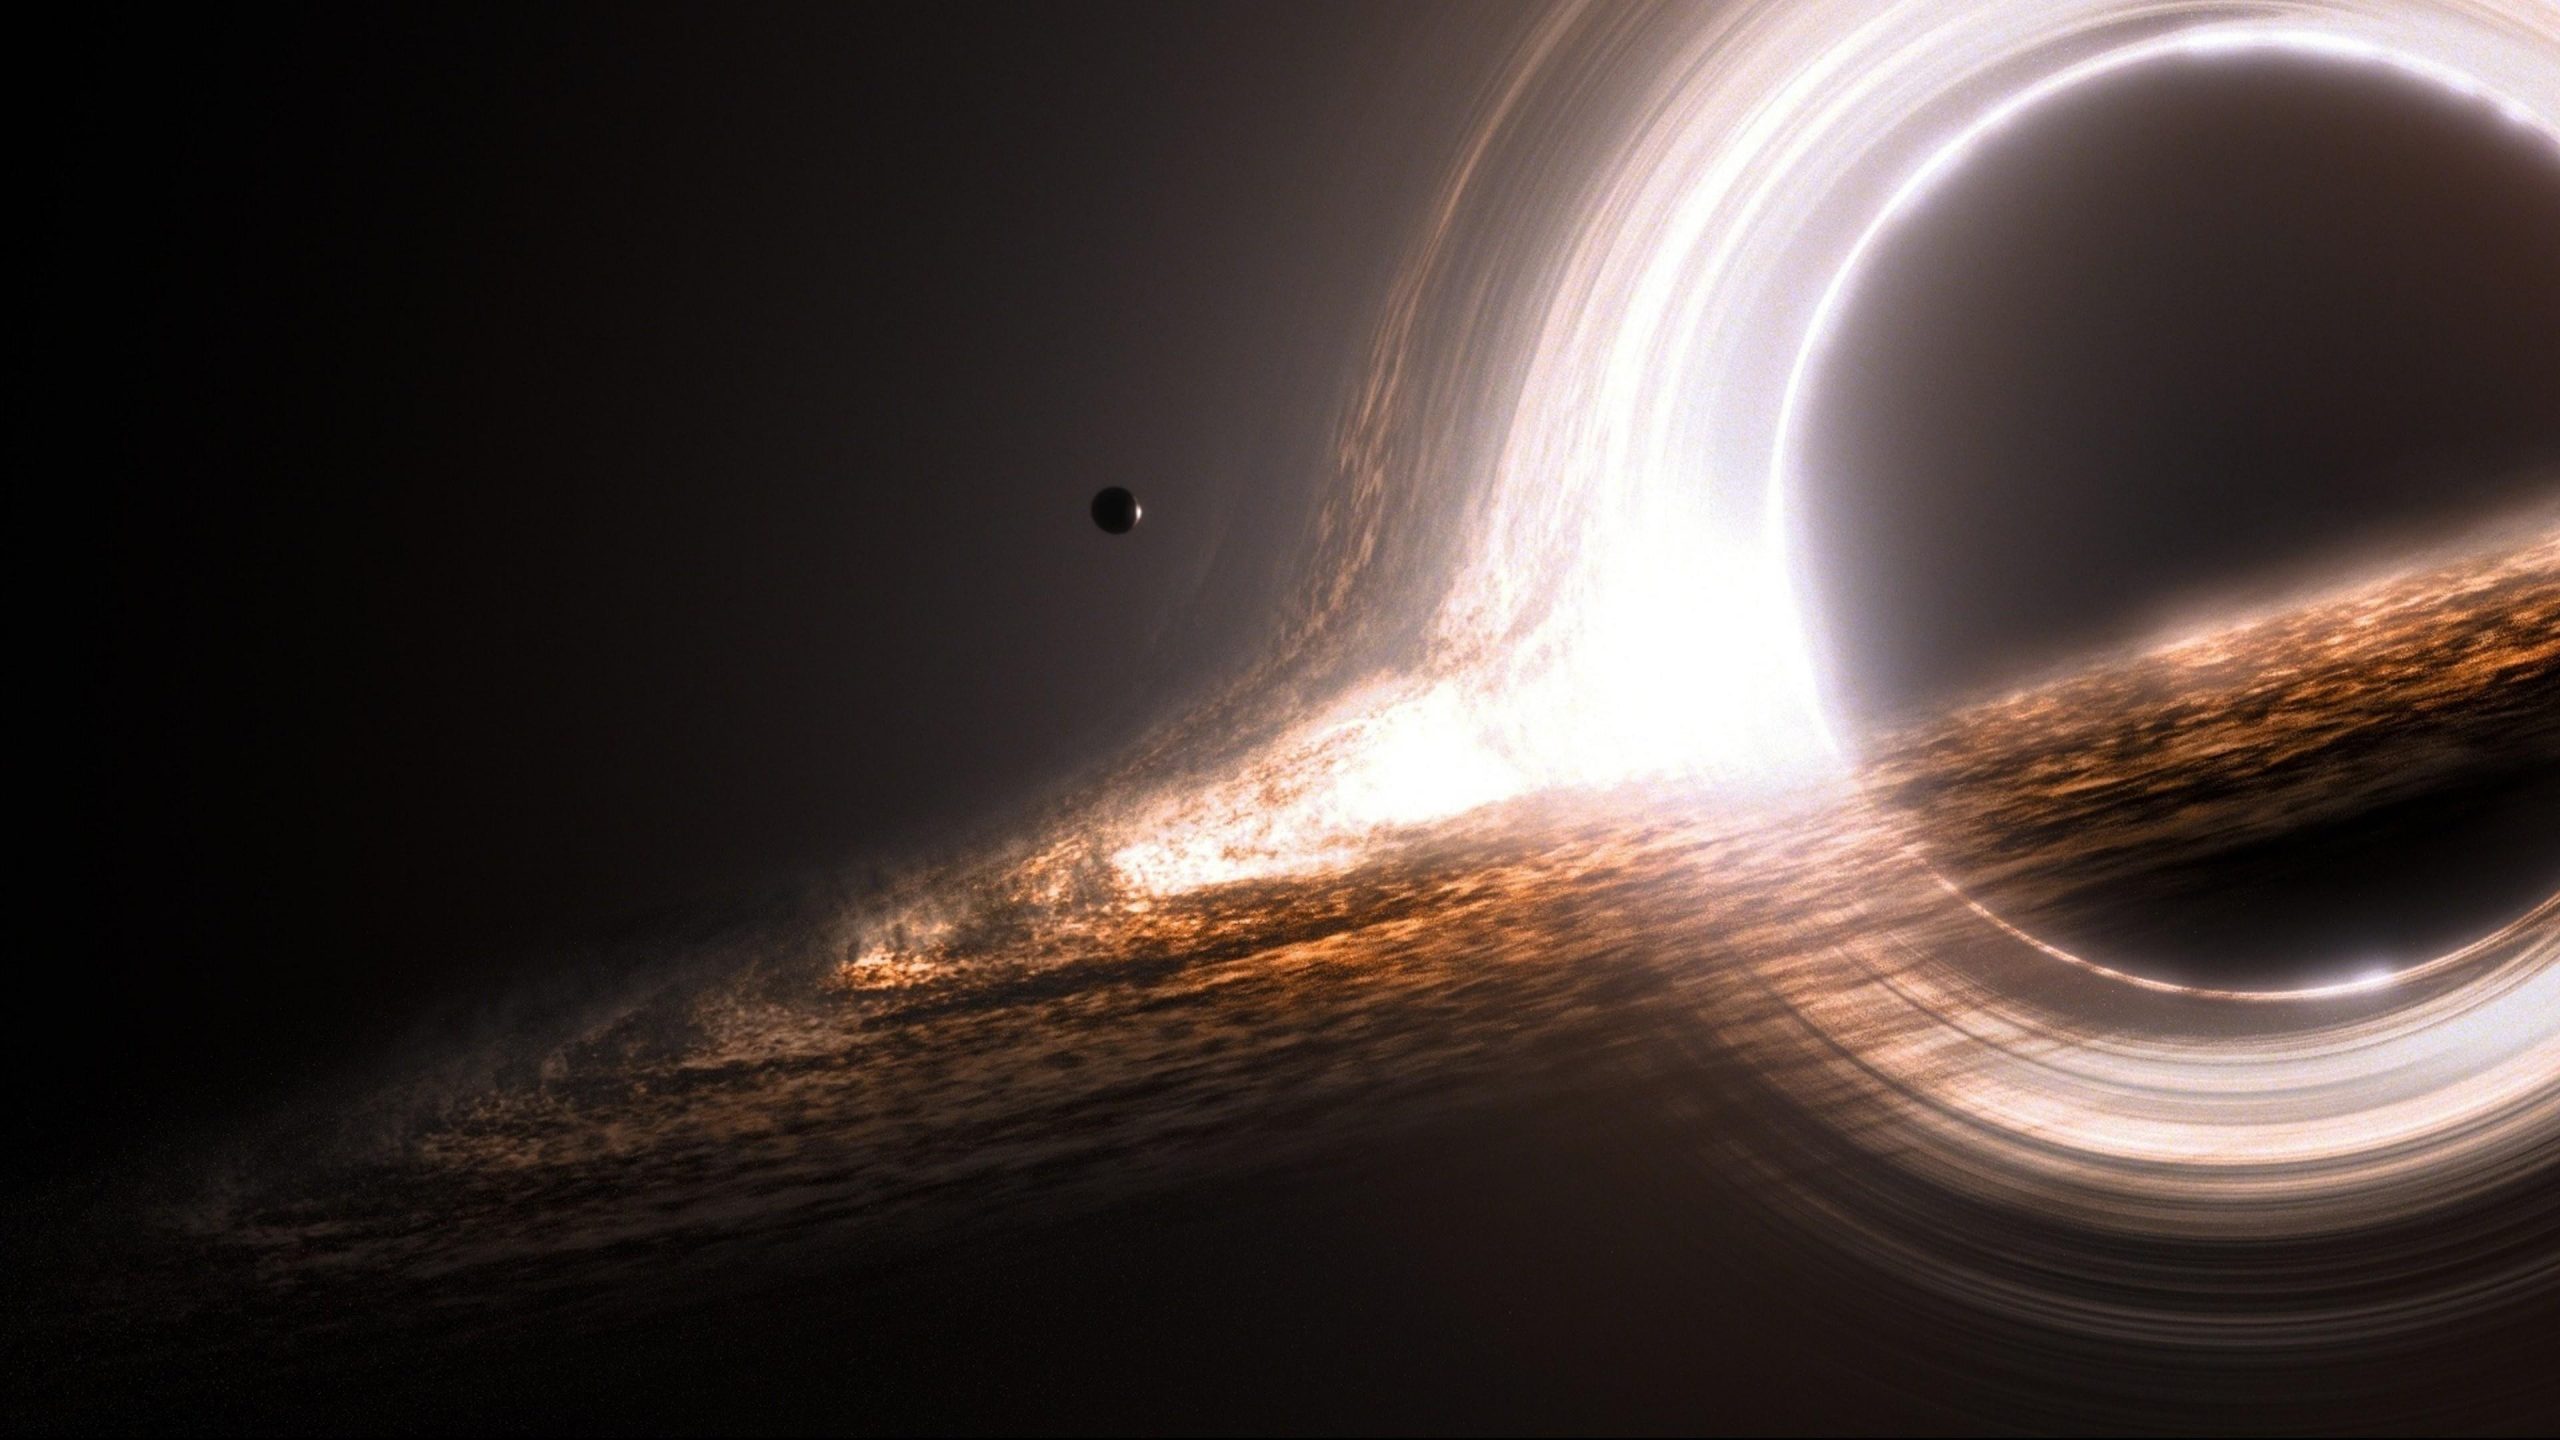 Wallpaper Space Black Hole Interstellar Planet Wallpaper For You